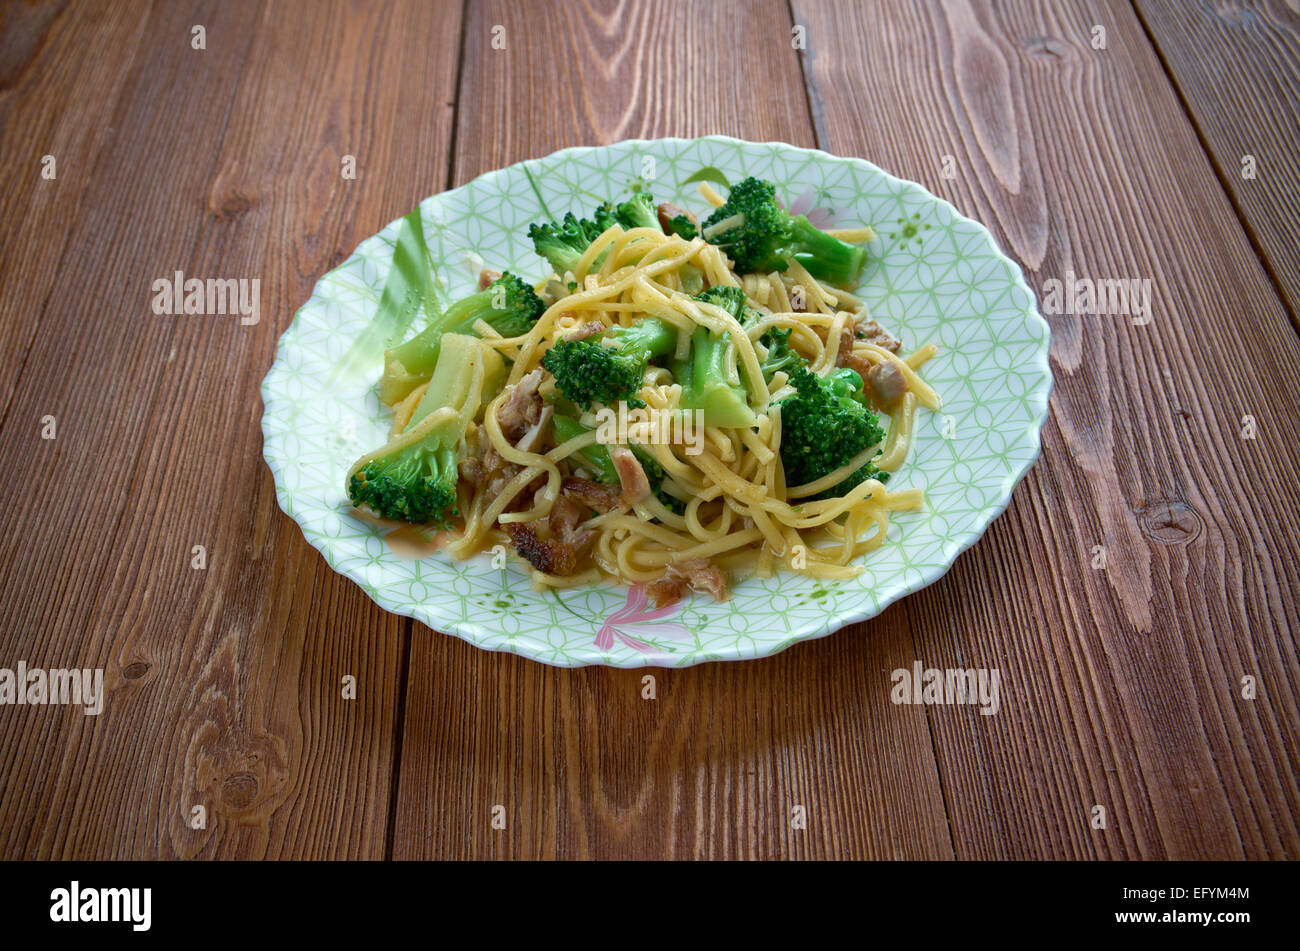 Crunchy Broccoli Salad with noodles, chicken Stock Photo